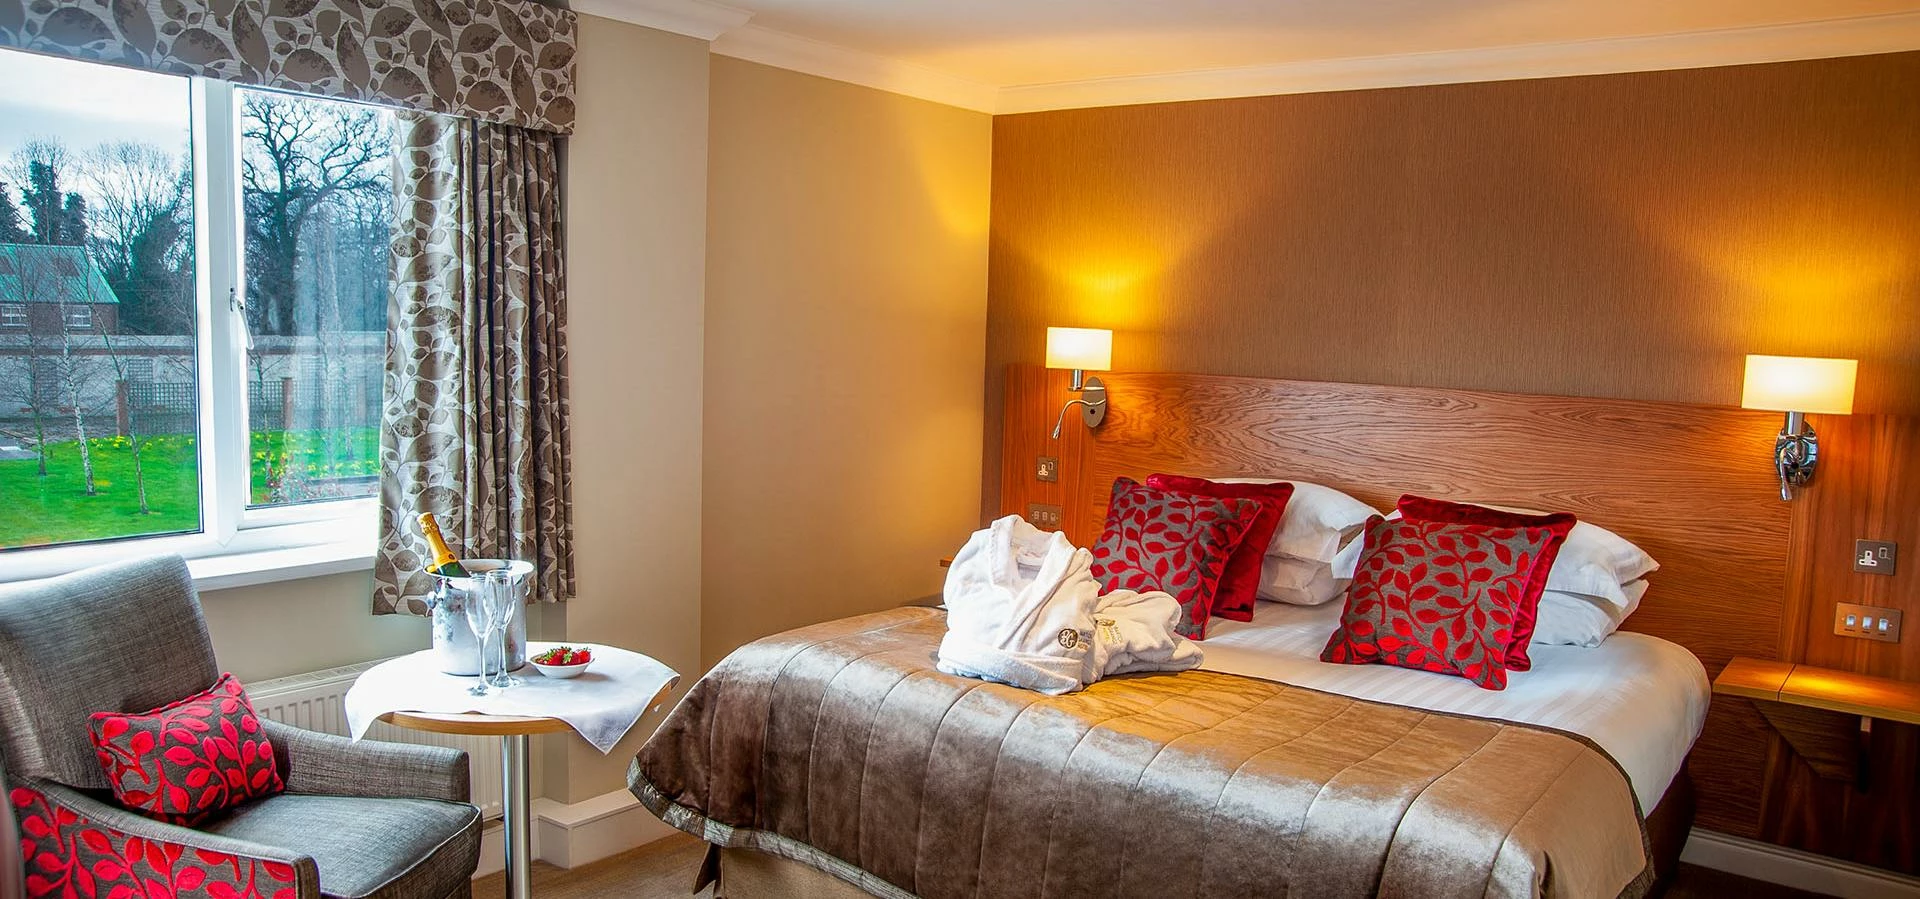 Refurbished Bedrooms are a part of the £670 000 Upgrades at the Barton Grange Hotel, Lancashire